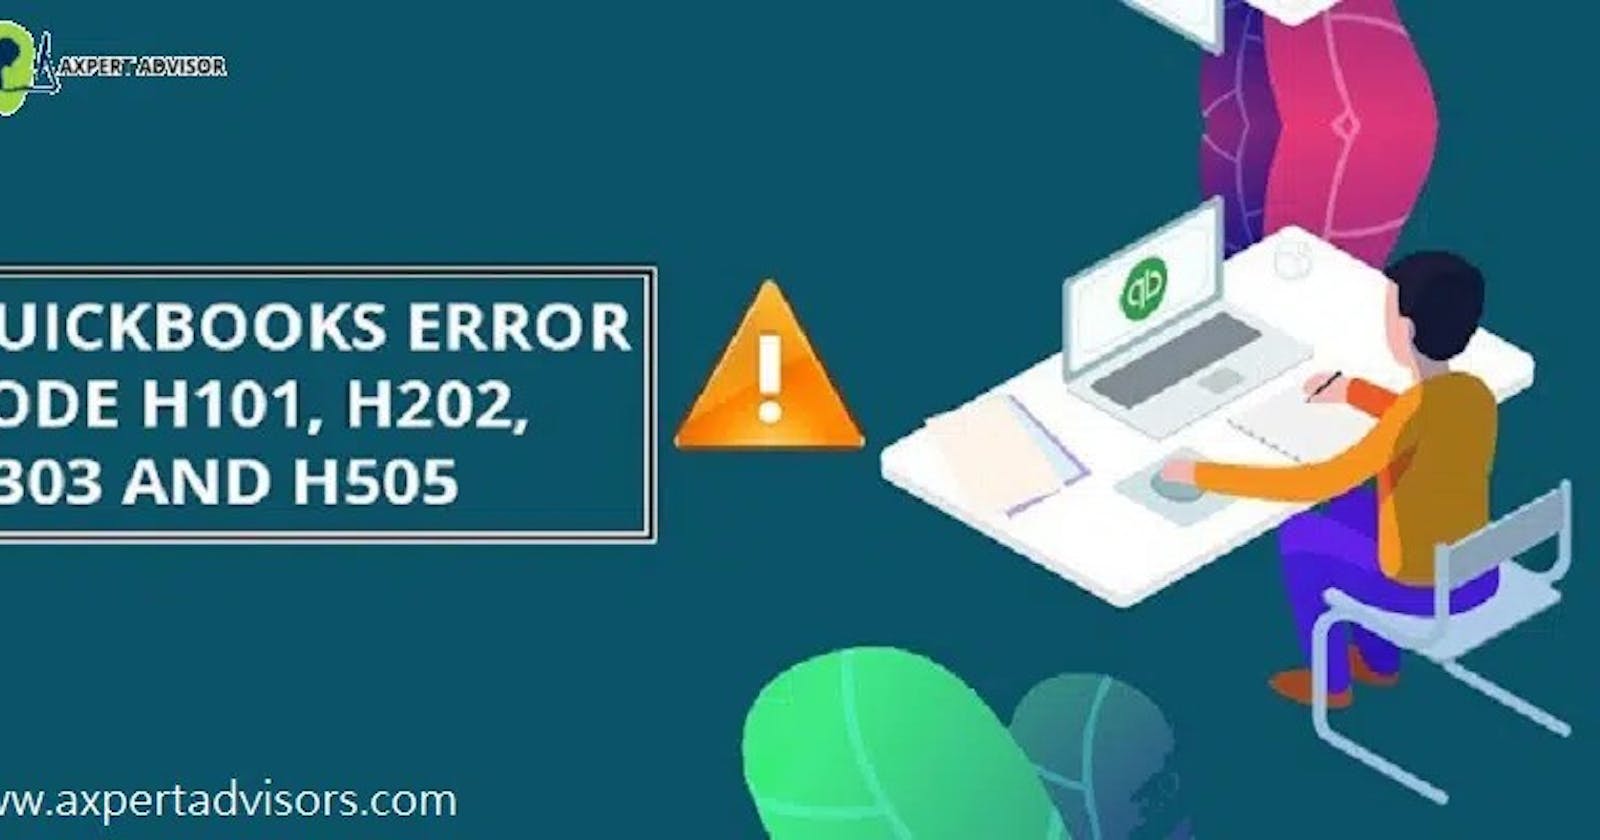 How to Fix QuickBooks Error H101, H202, H203 and H505?